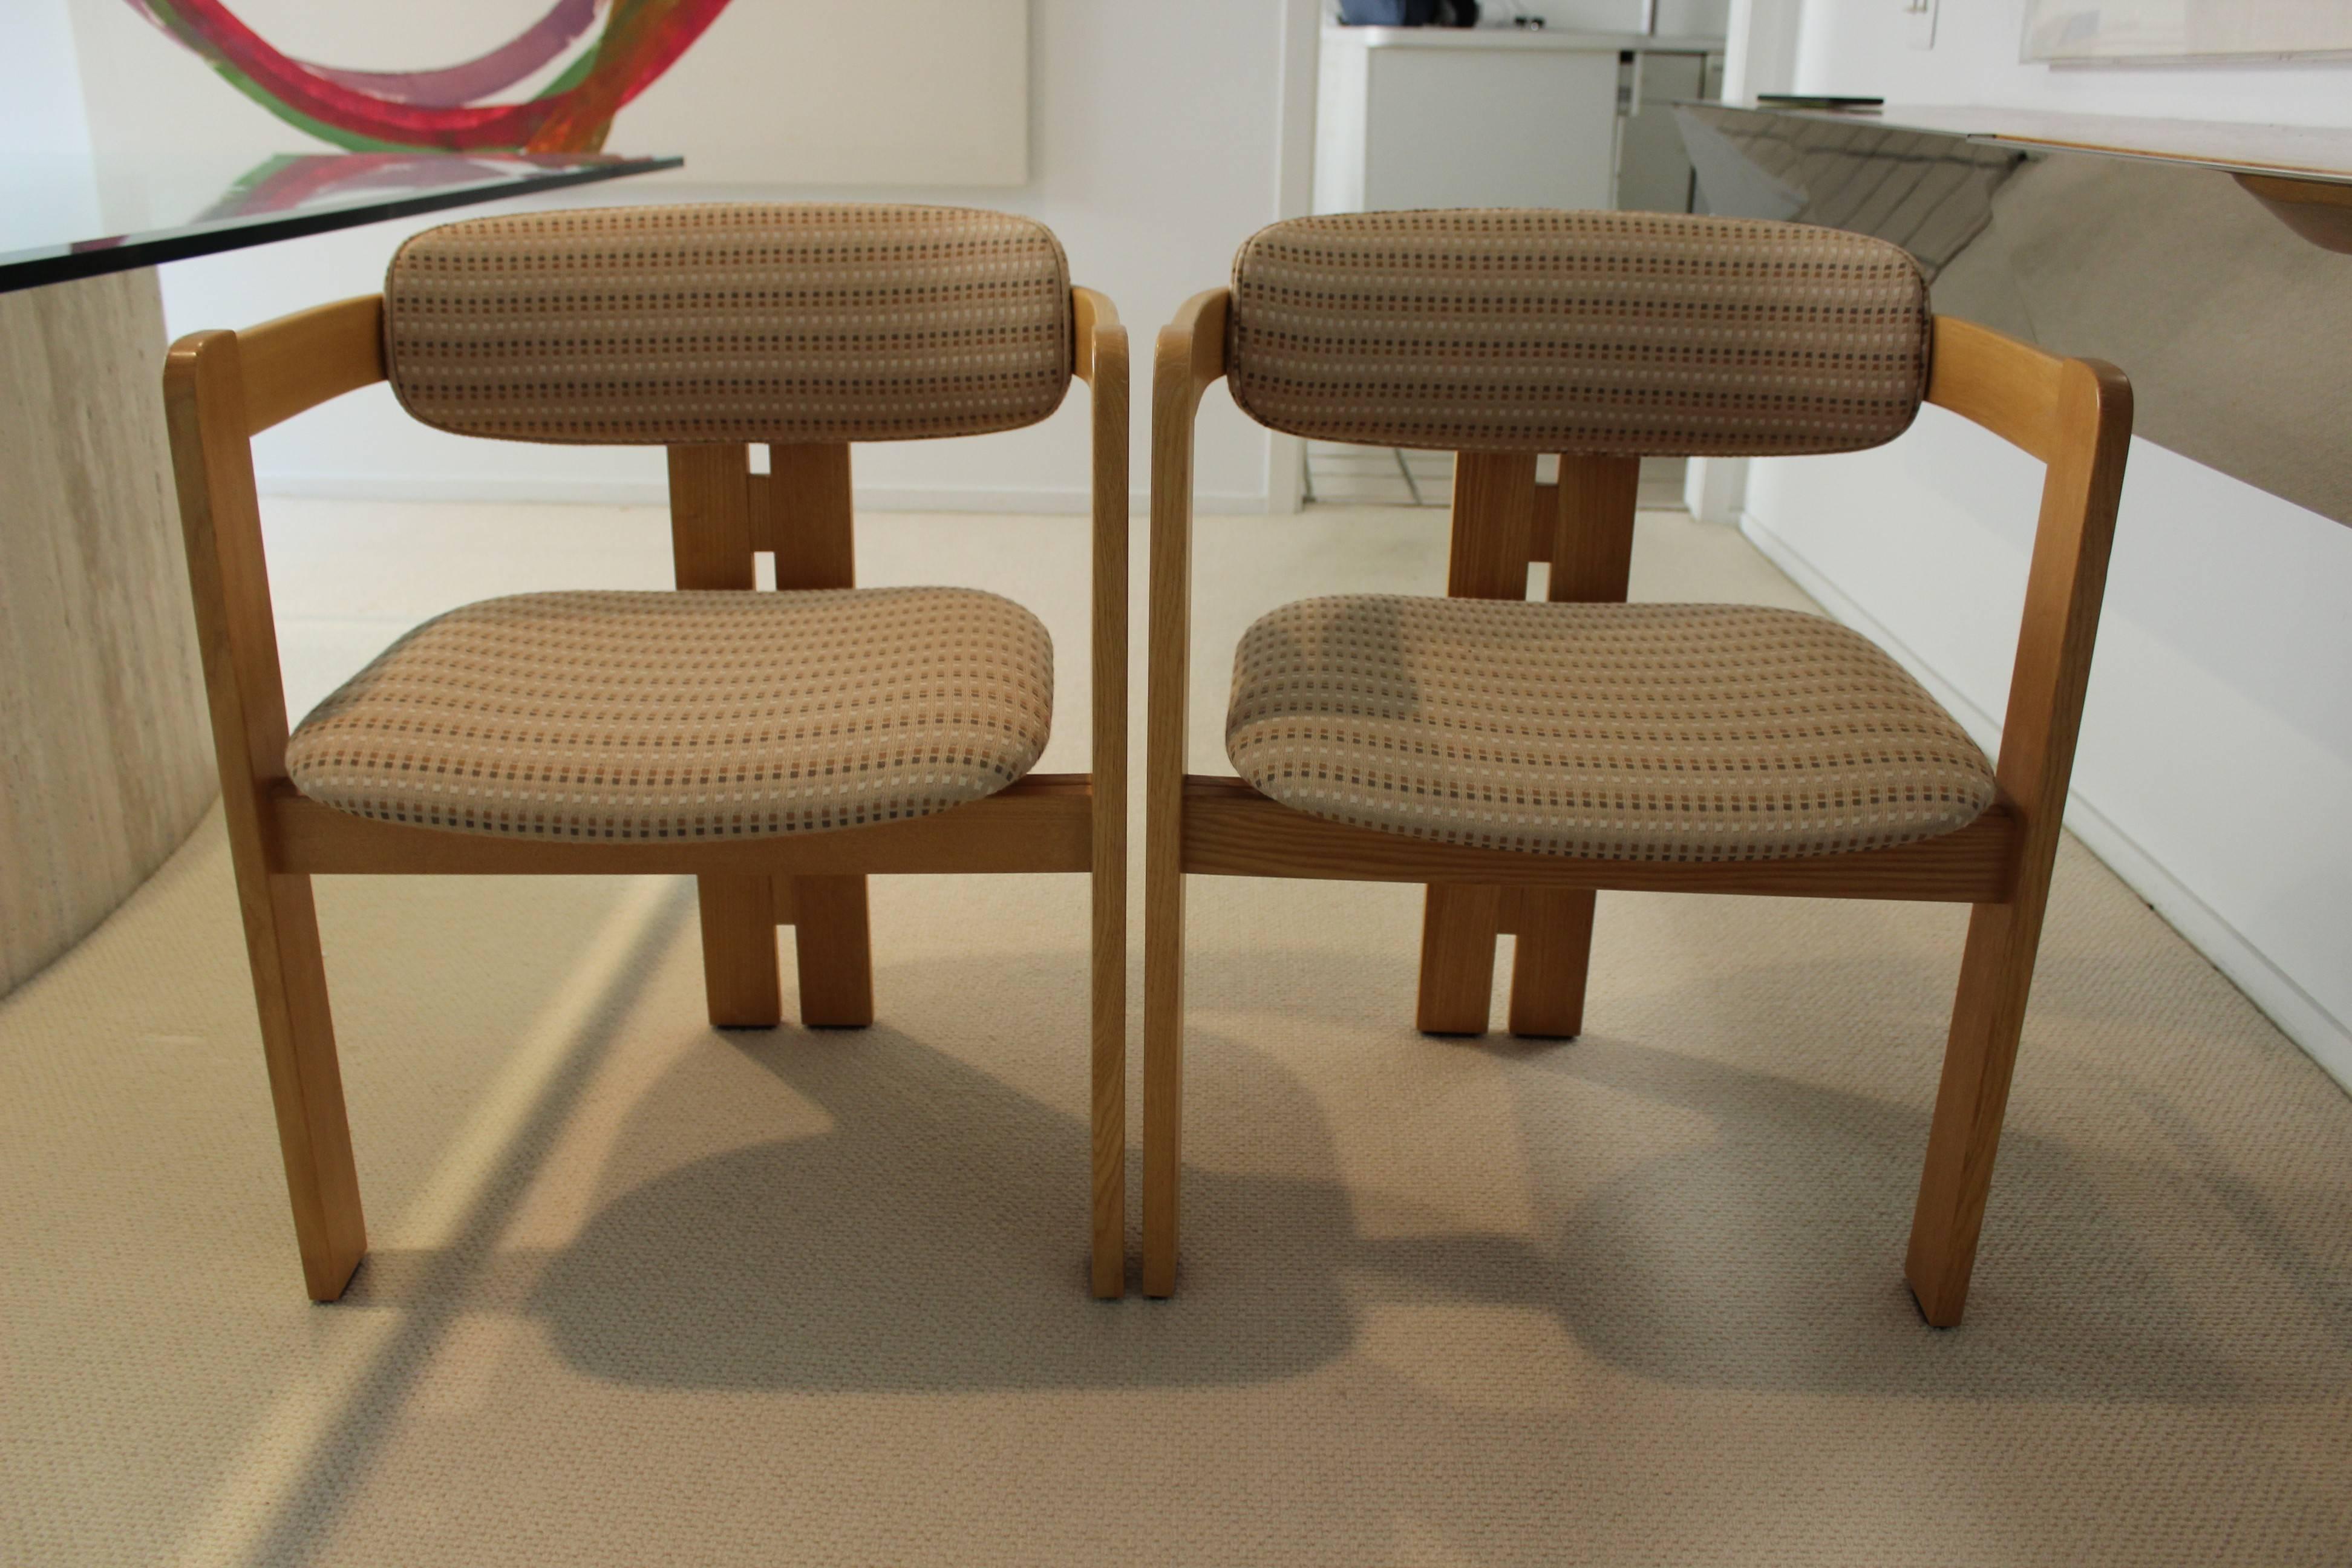 Made in Italy by Gavina, this set of six armchairs were designed by Tobia Scarpa. Rare to find six available together.